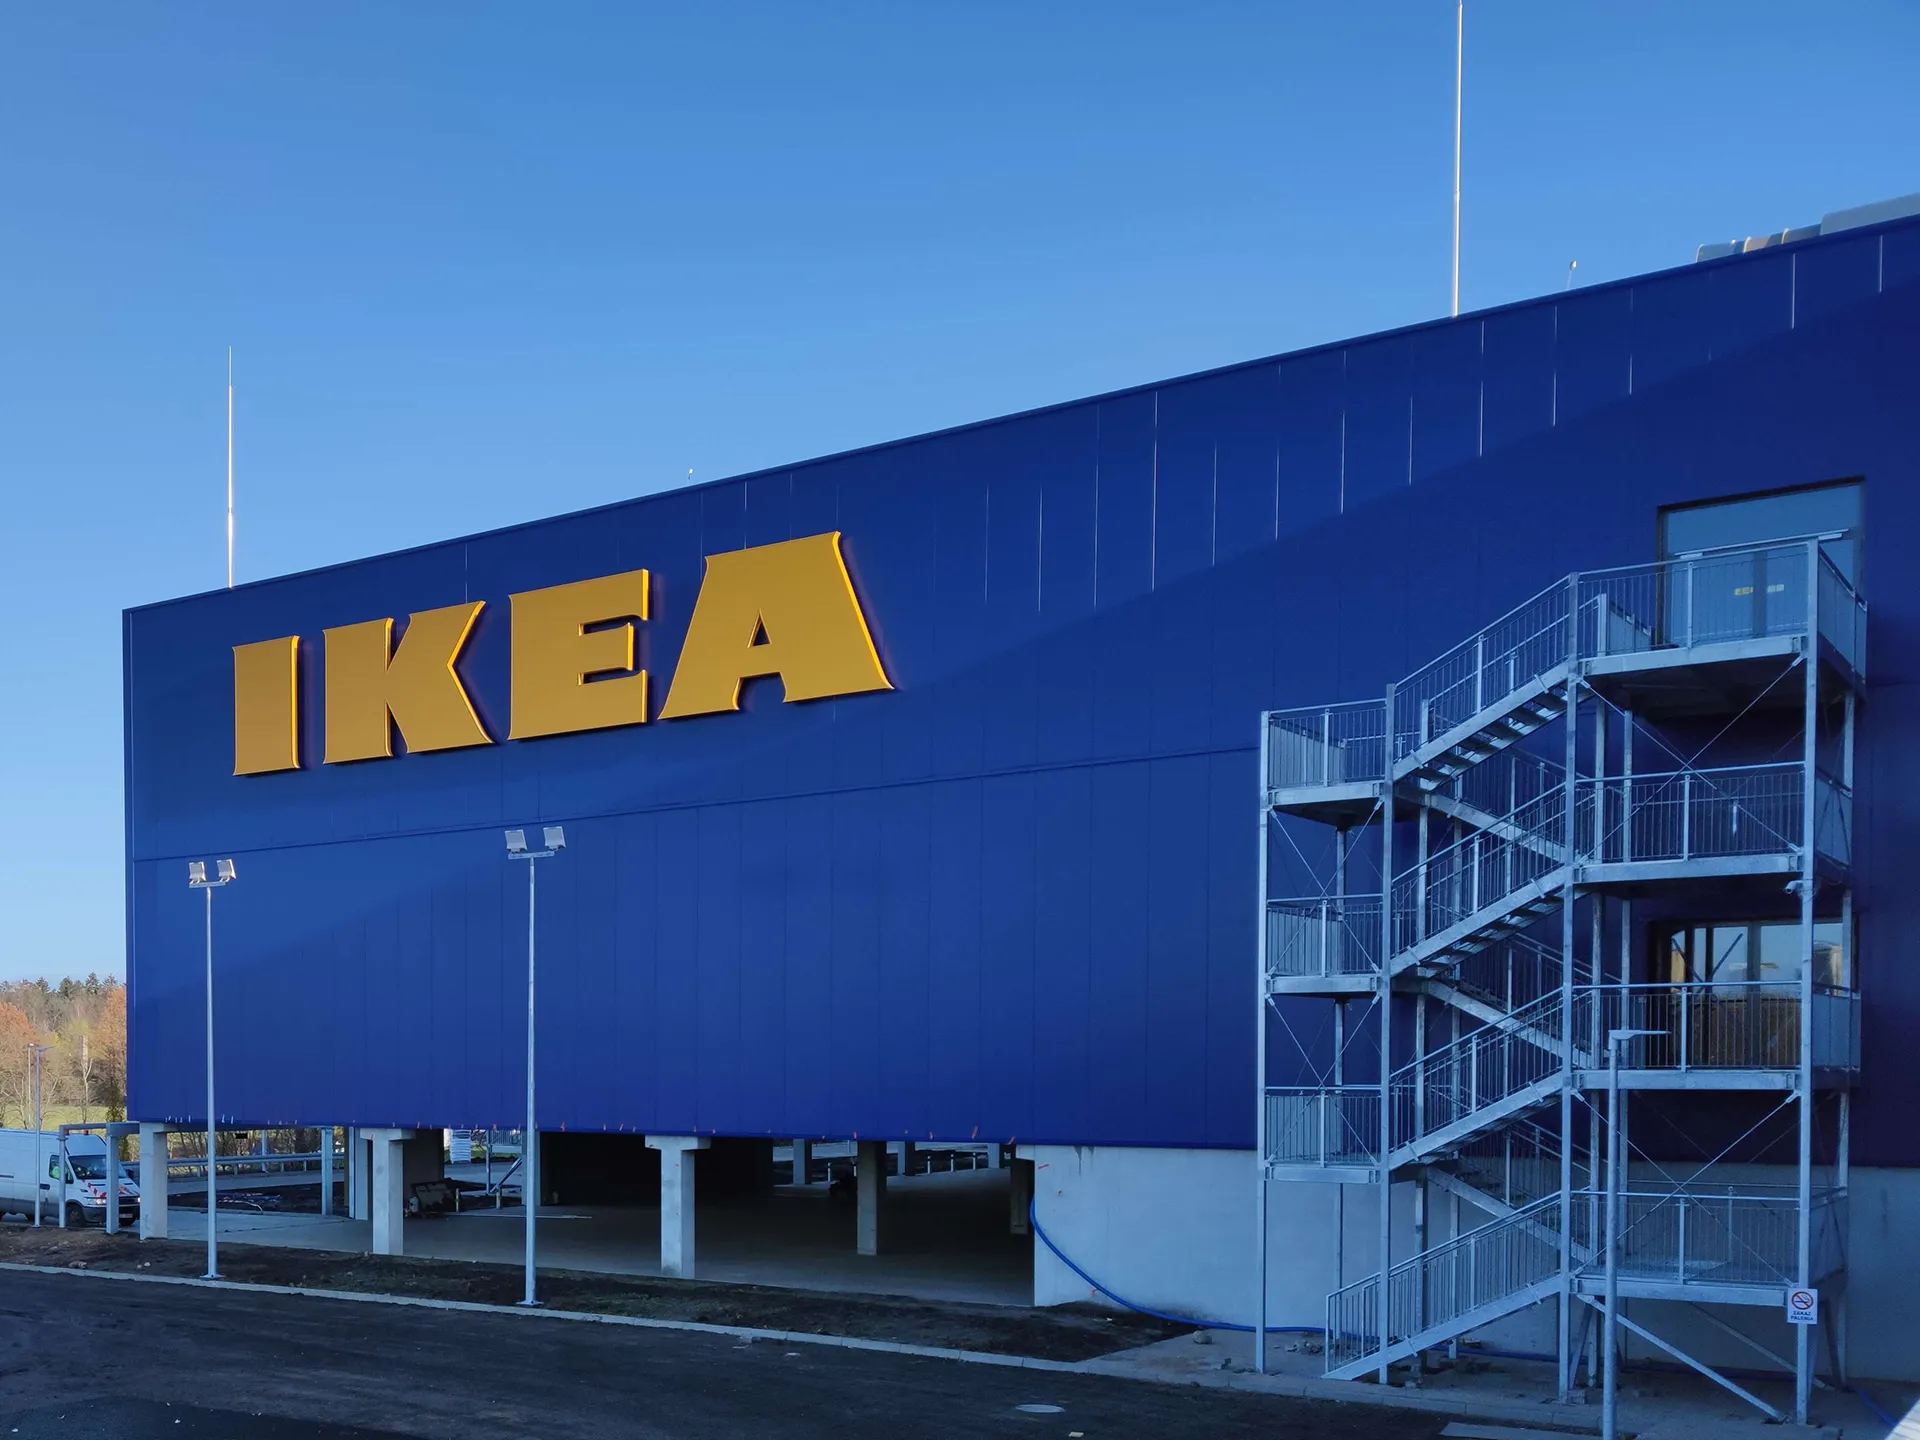 Prime Construction concluded contract for construction of IKEA shopping- exhibition center in city of Szczecin.